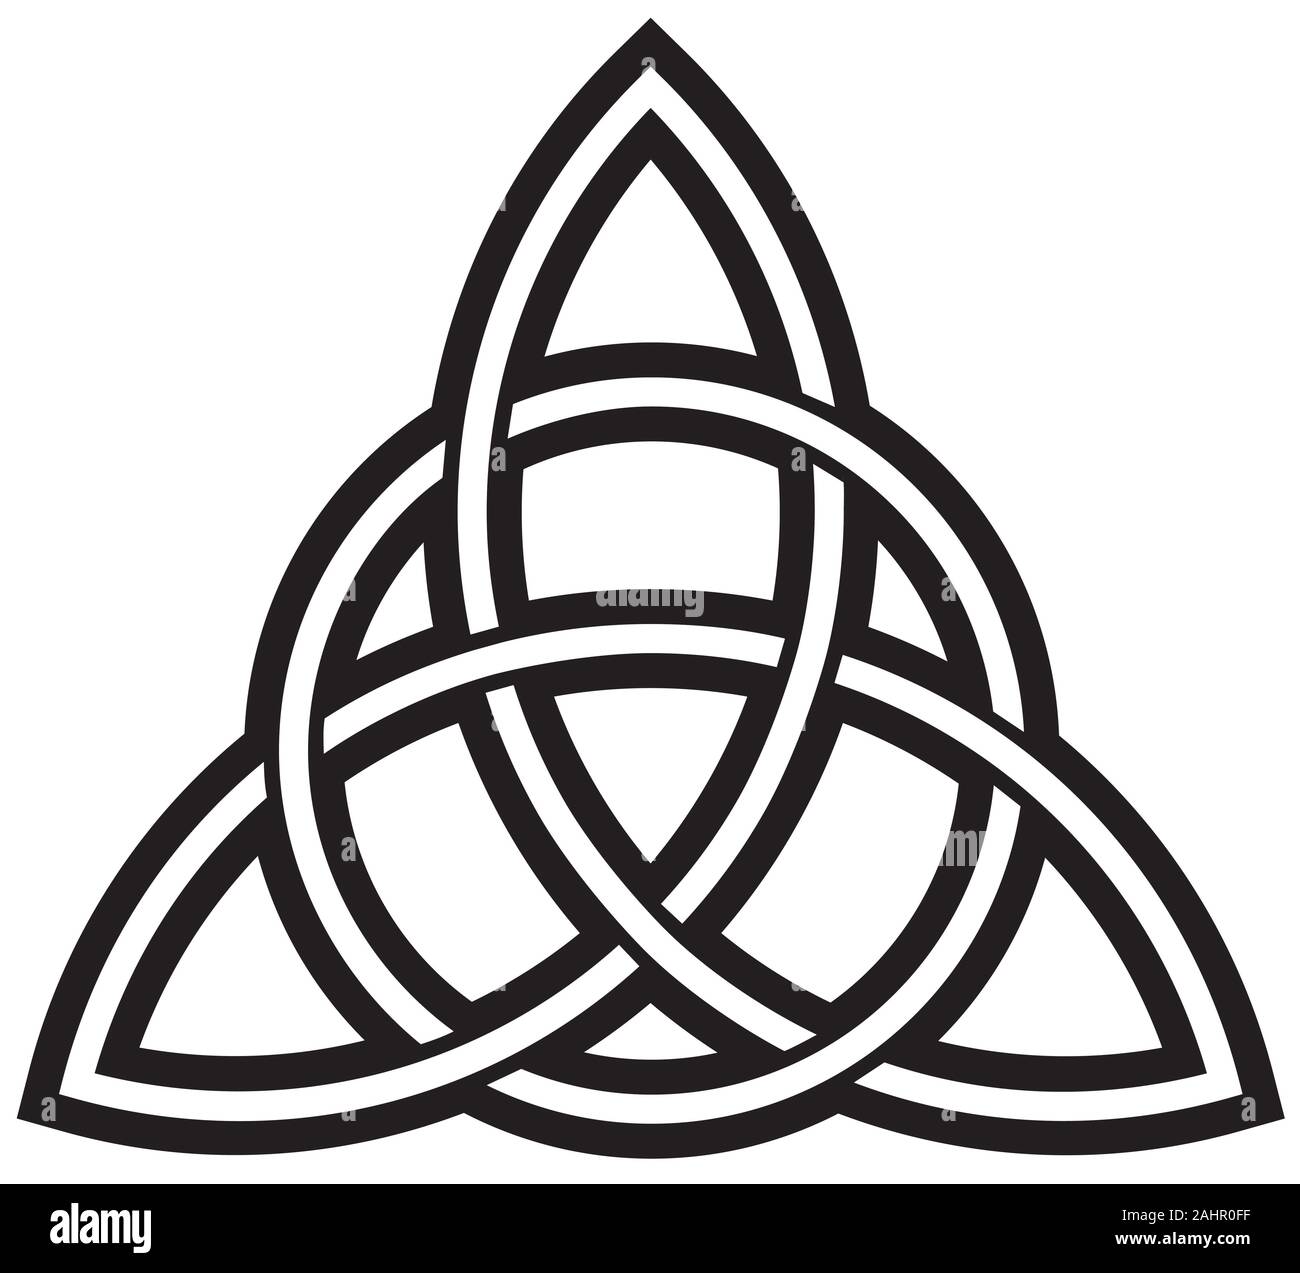 Black Celtic Trinity Knot isolated against a white background Stock Photo